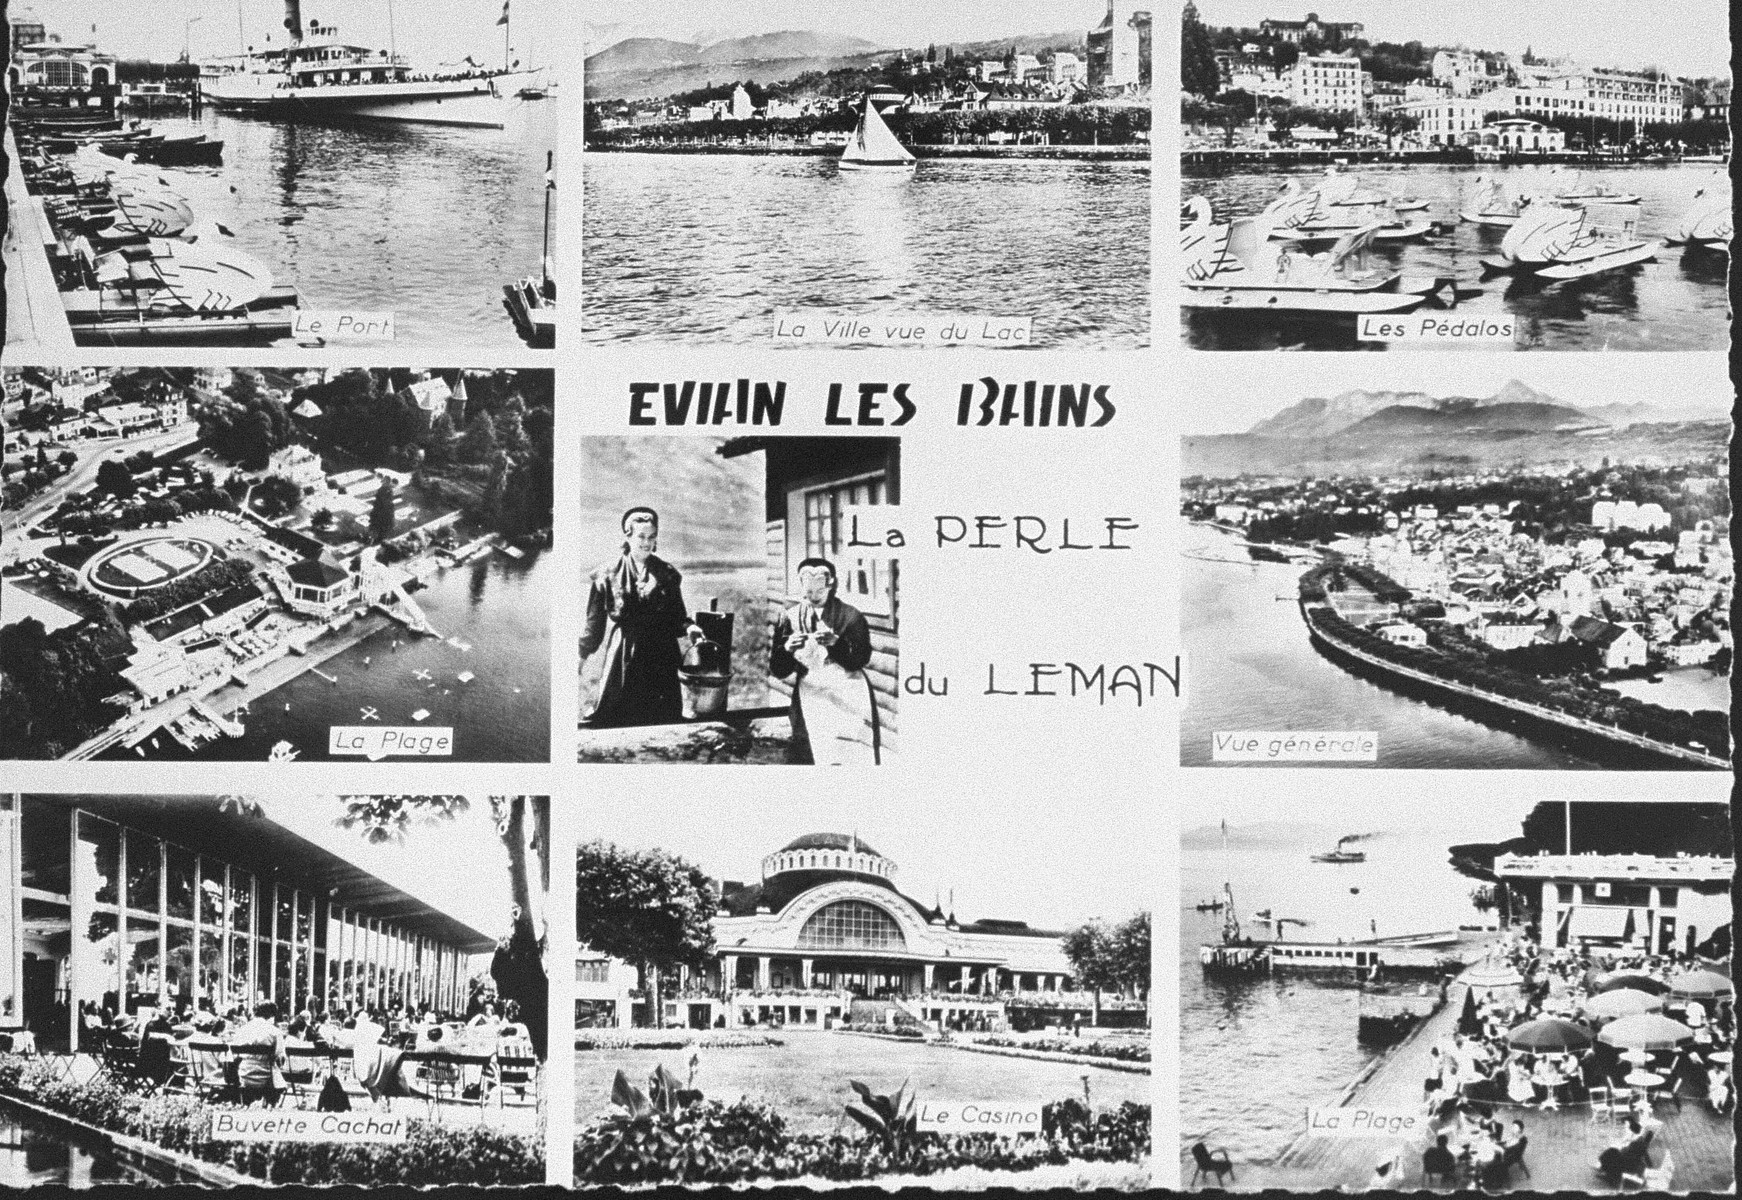 Period postcard of Evian-les-Bains, the site of the 1938 International Conference on Refugees.